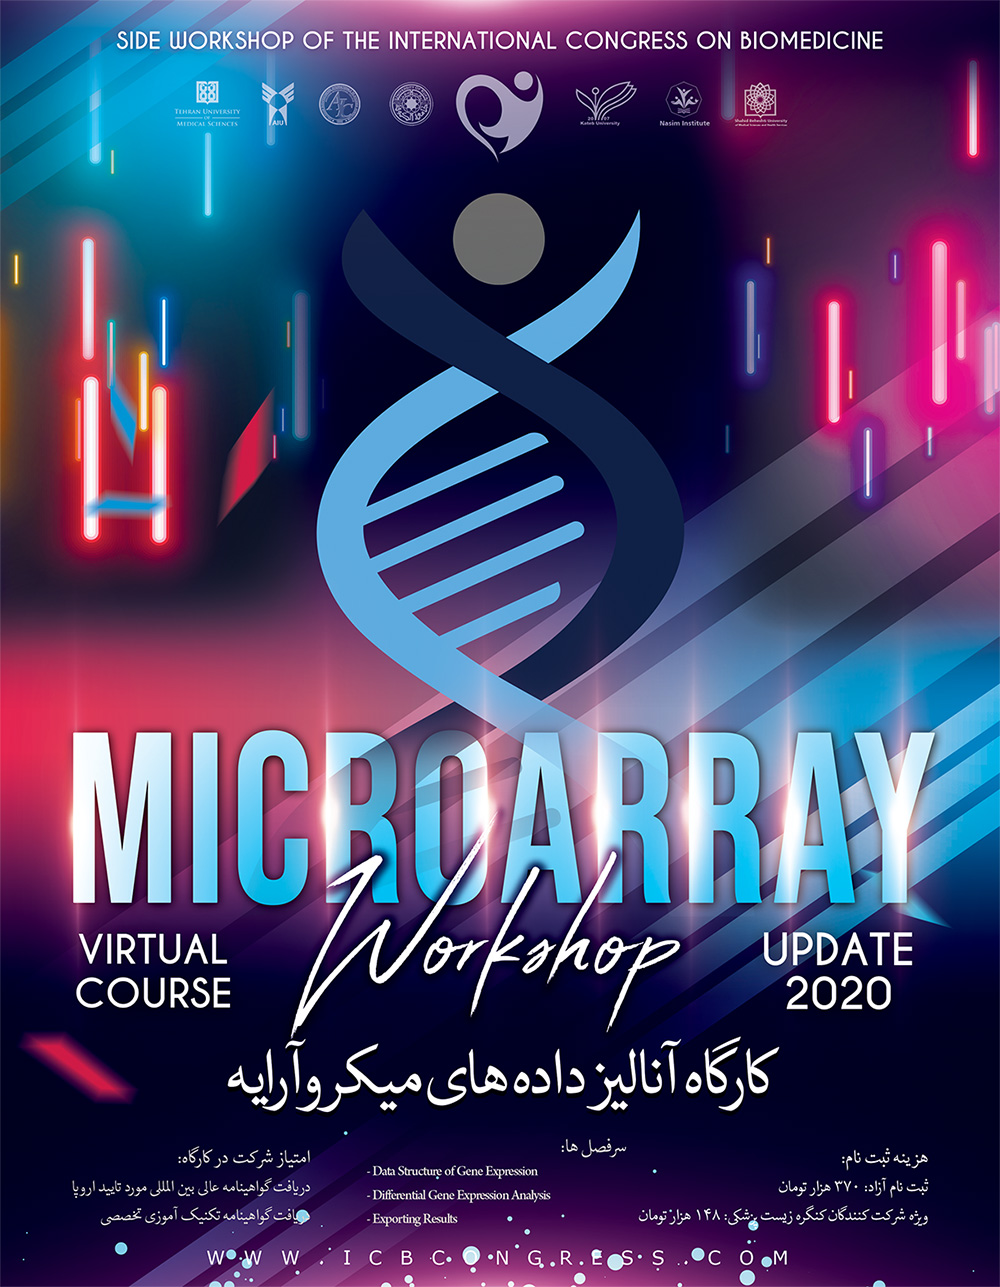 Microarray Analysis in R